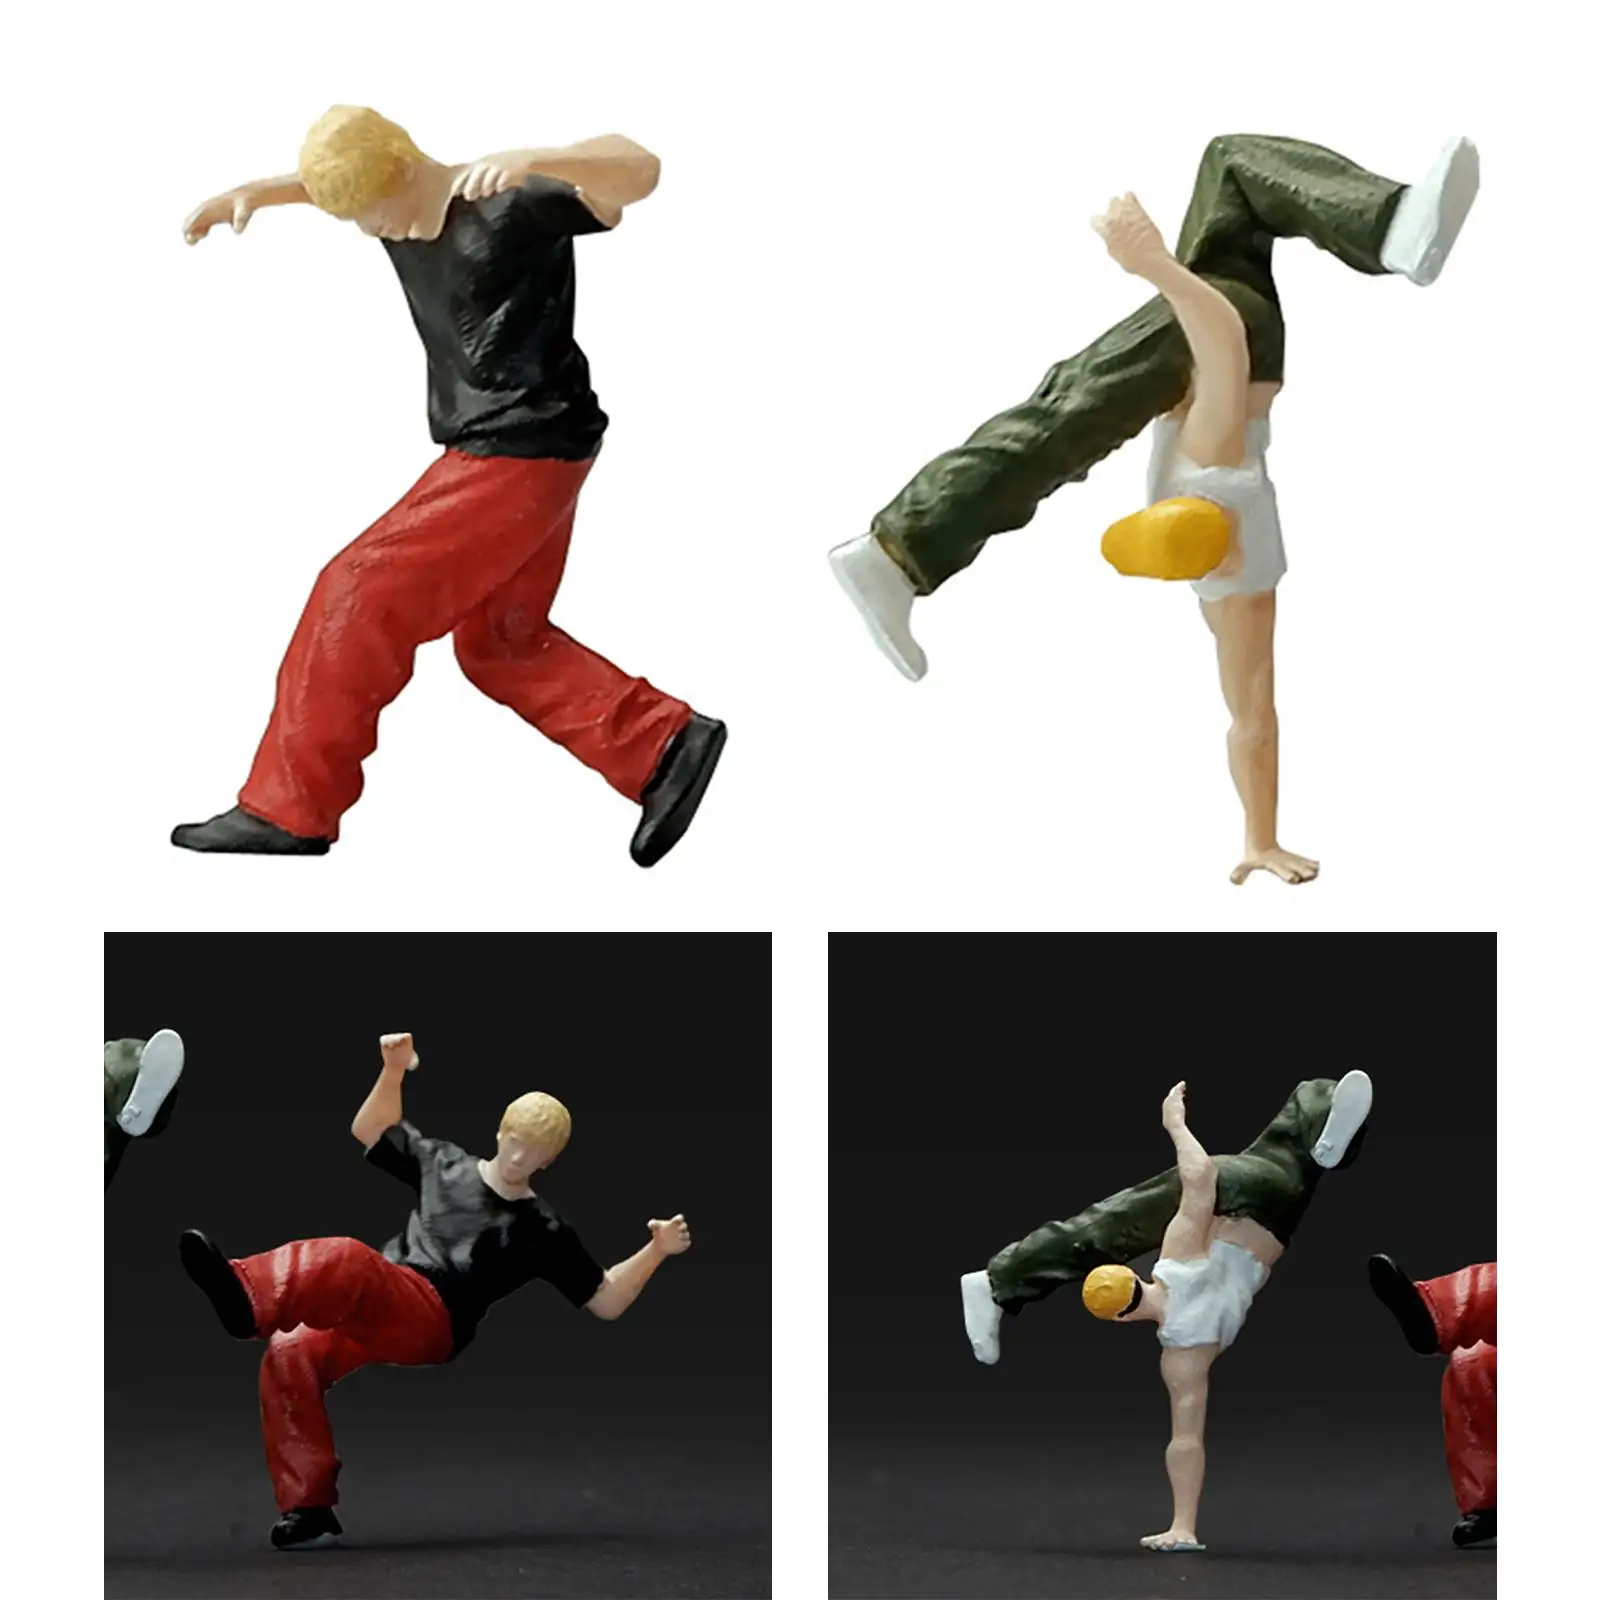 1/64 Scale Figure Street Dancer Model Handpainted for Micro Landscape Layout